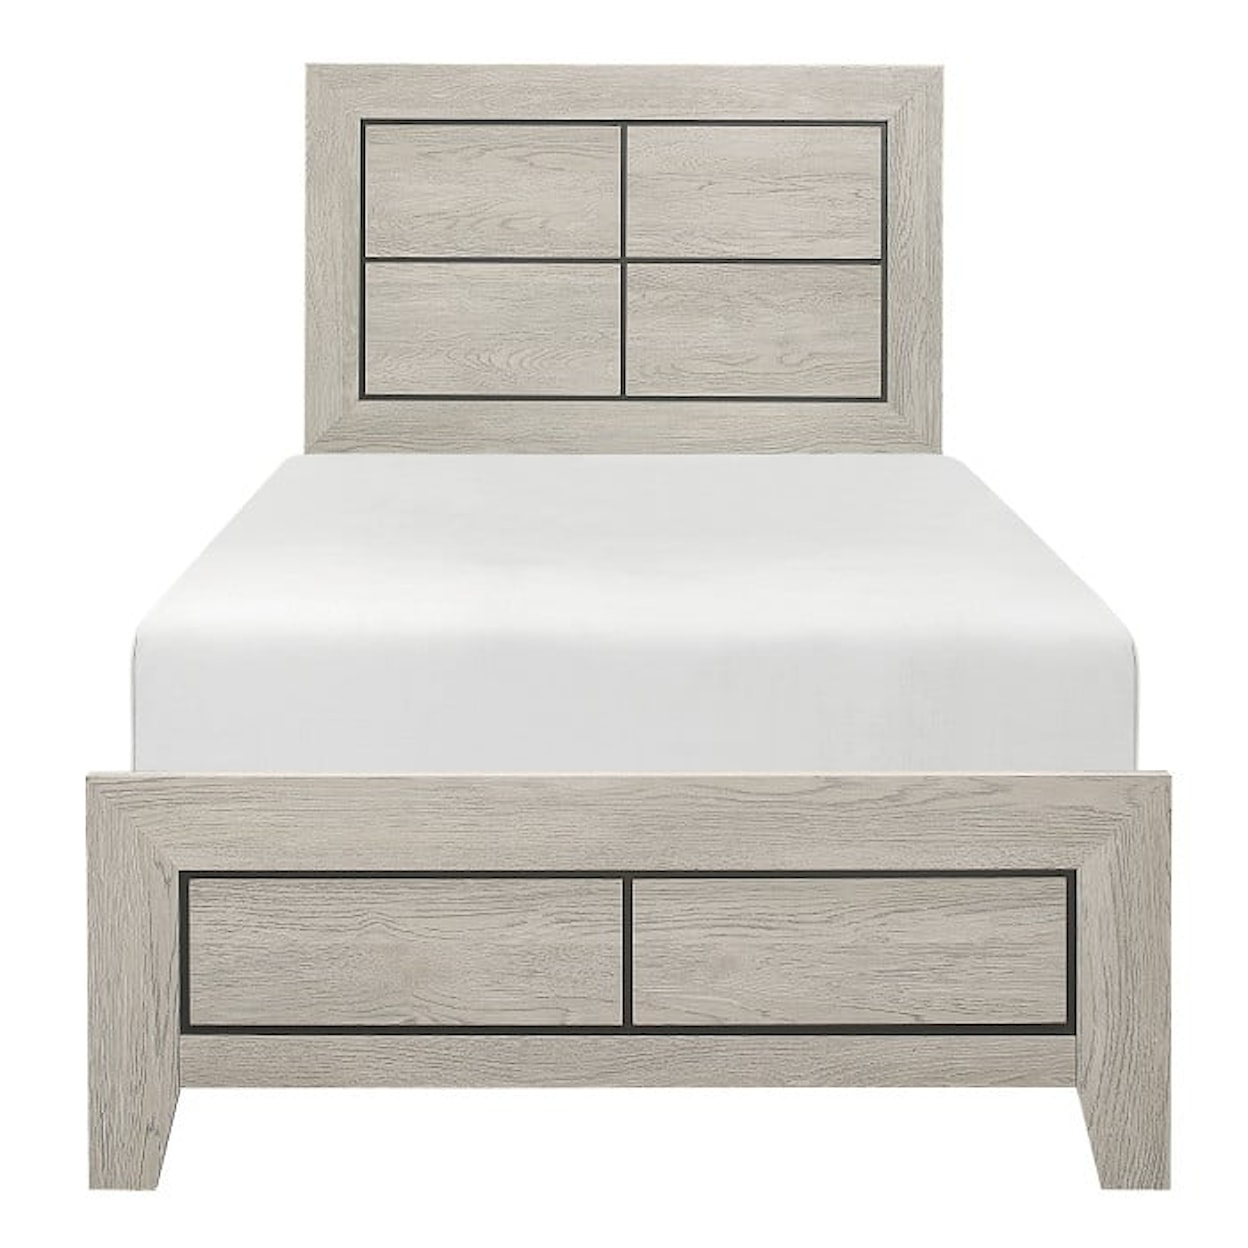 Homelegance Quinby Twin Panel Bed